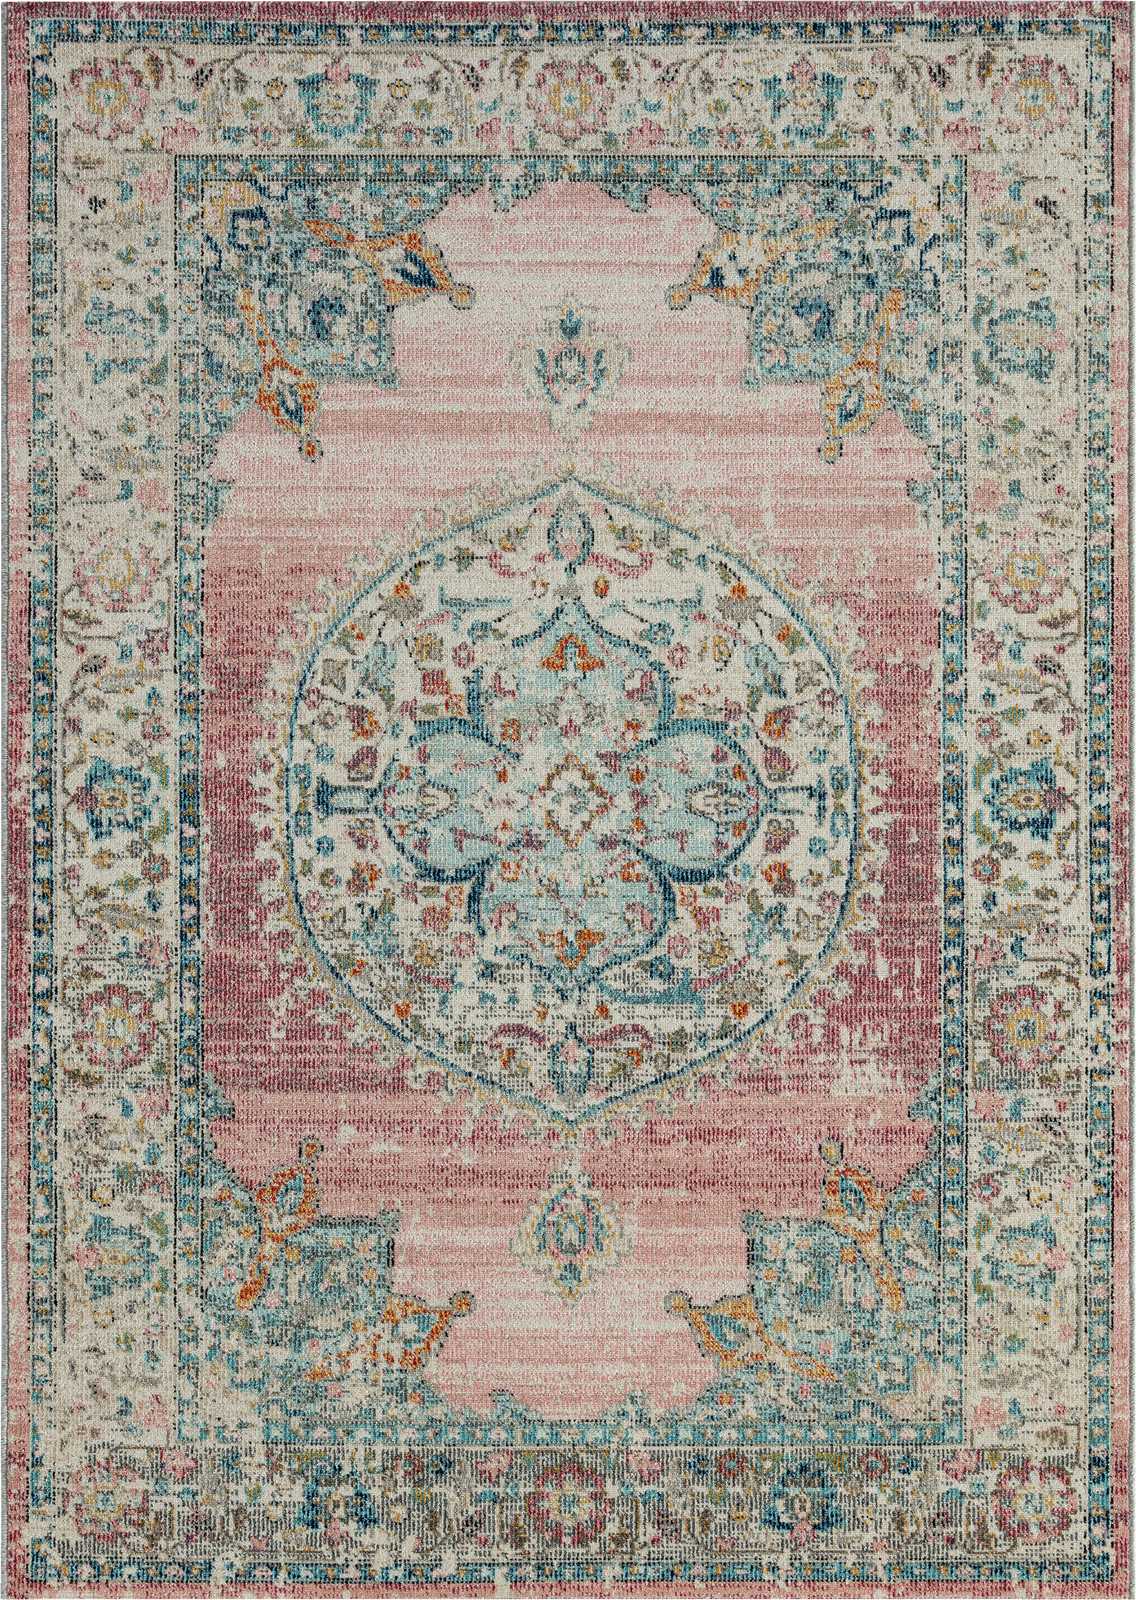             Flatweave Outdoor Rug with Pink Accents - 150 x 80 cm
        